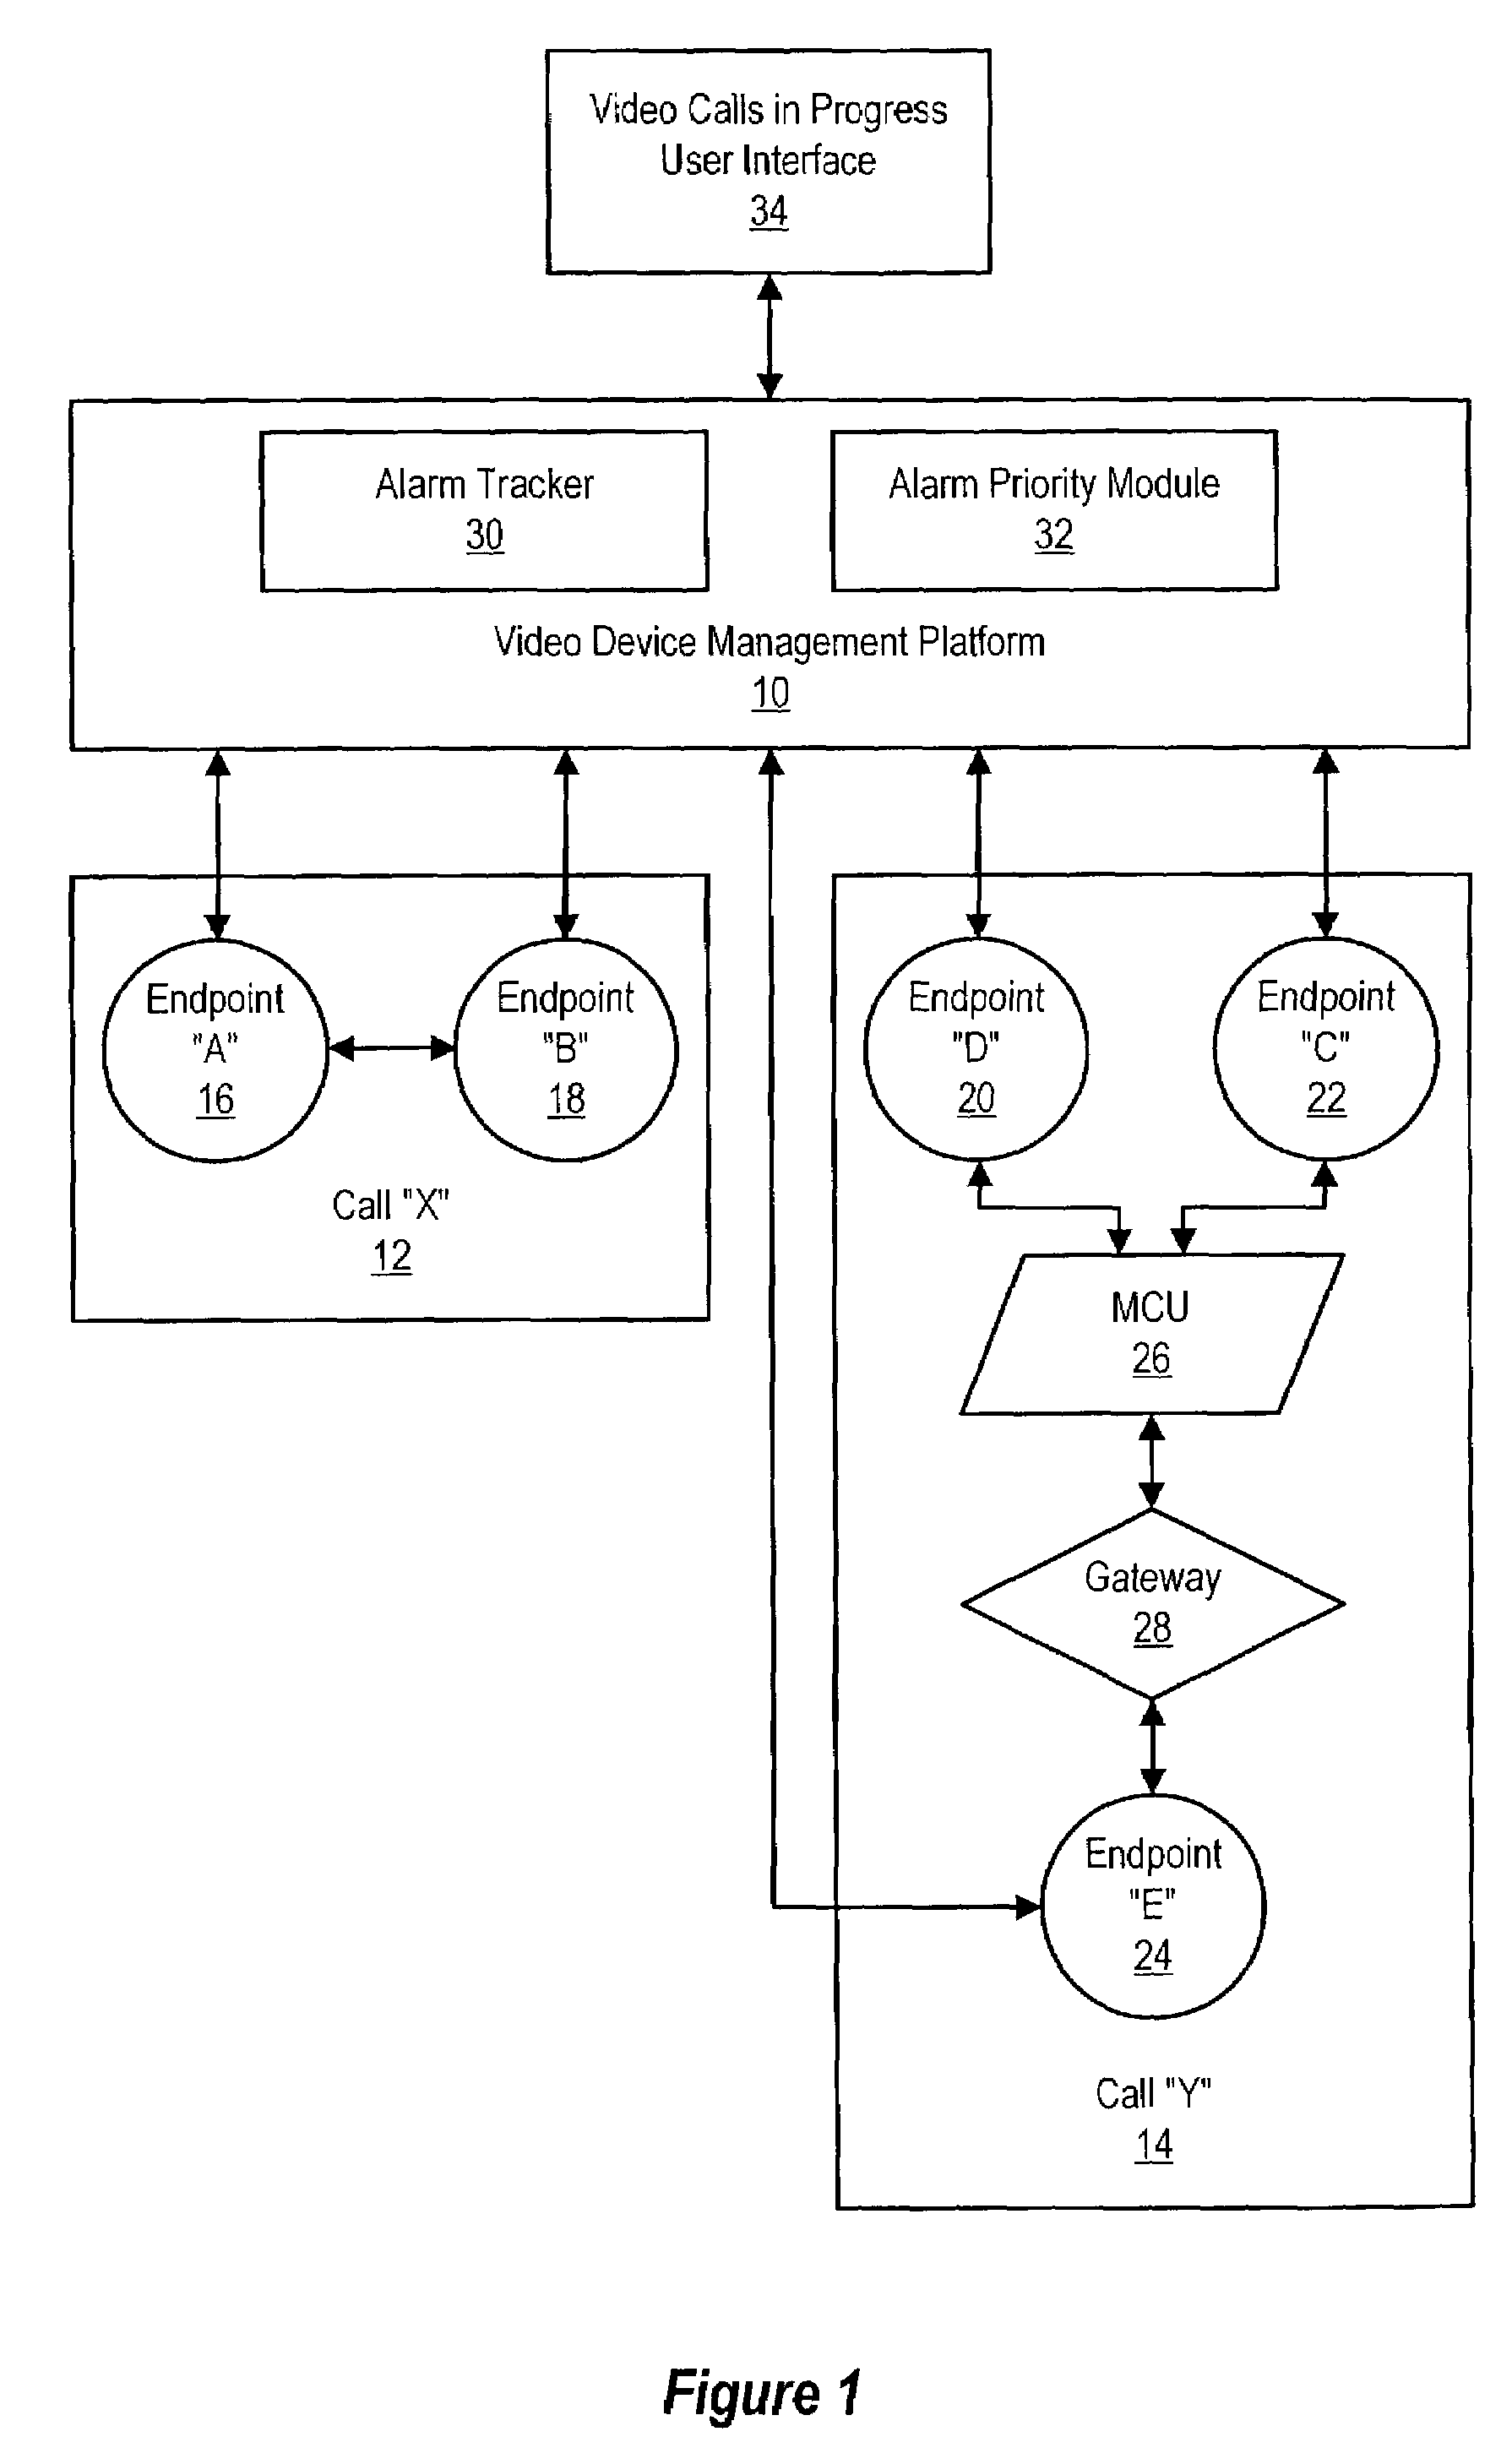 Method and system for presenting a video call management console